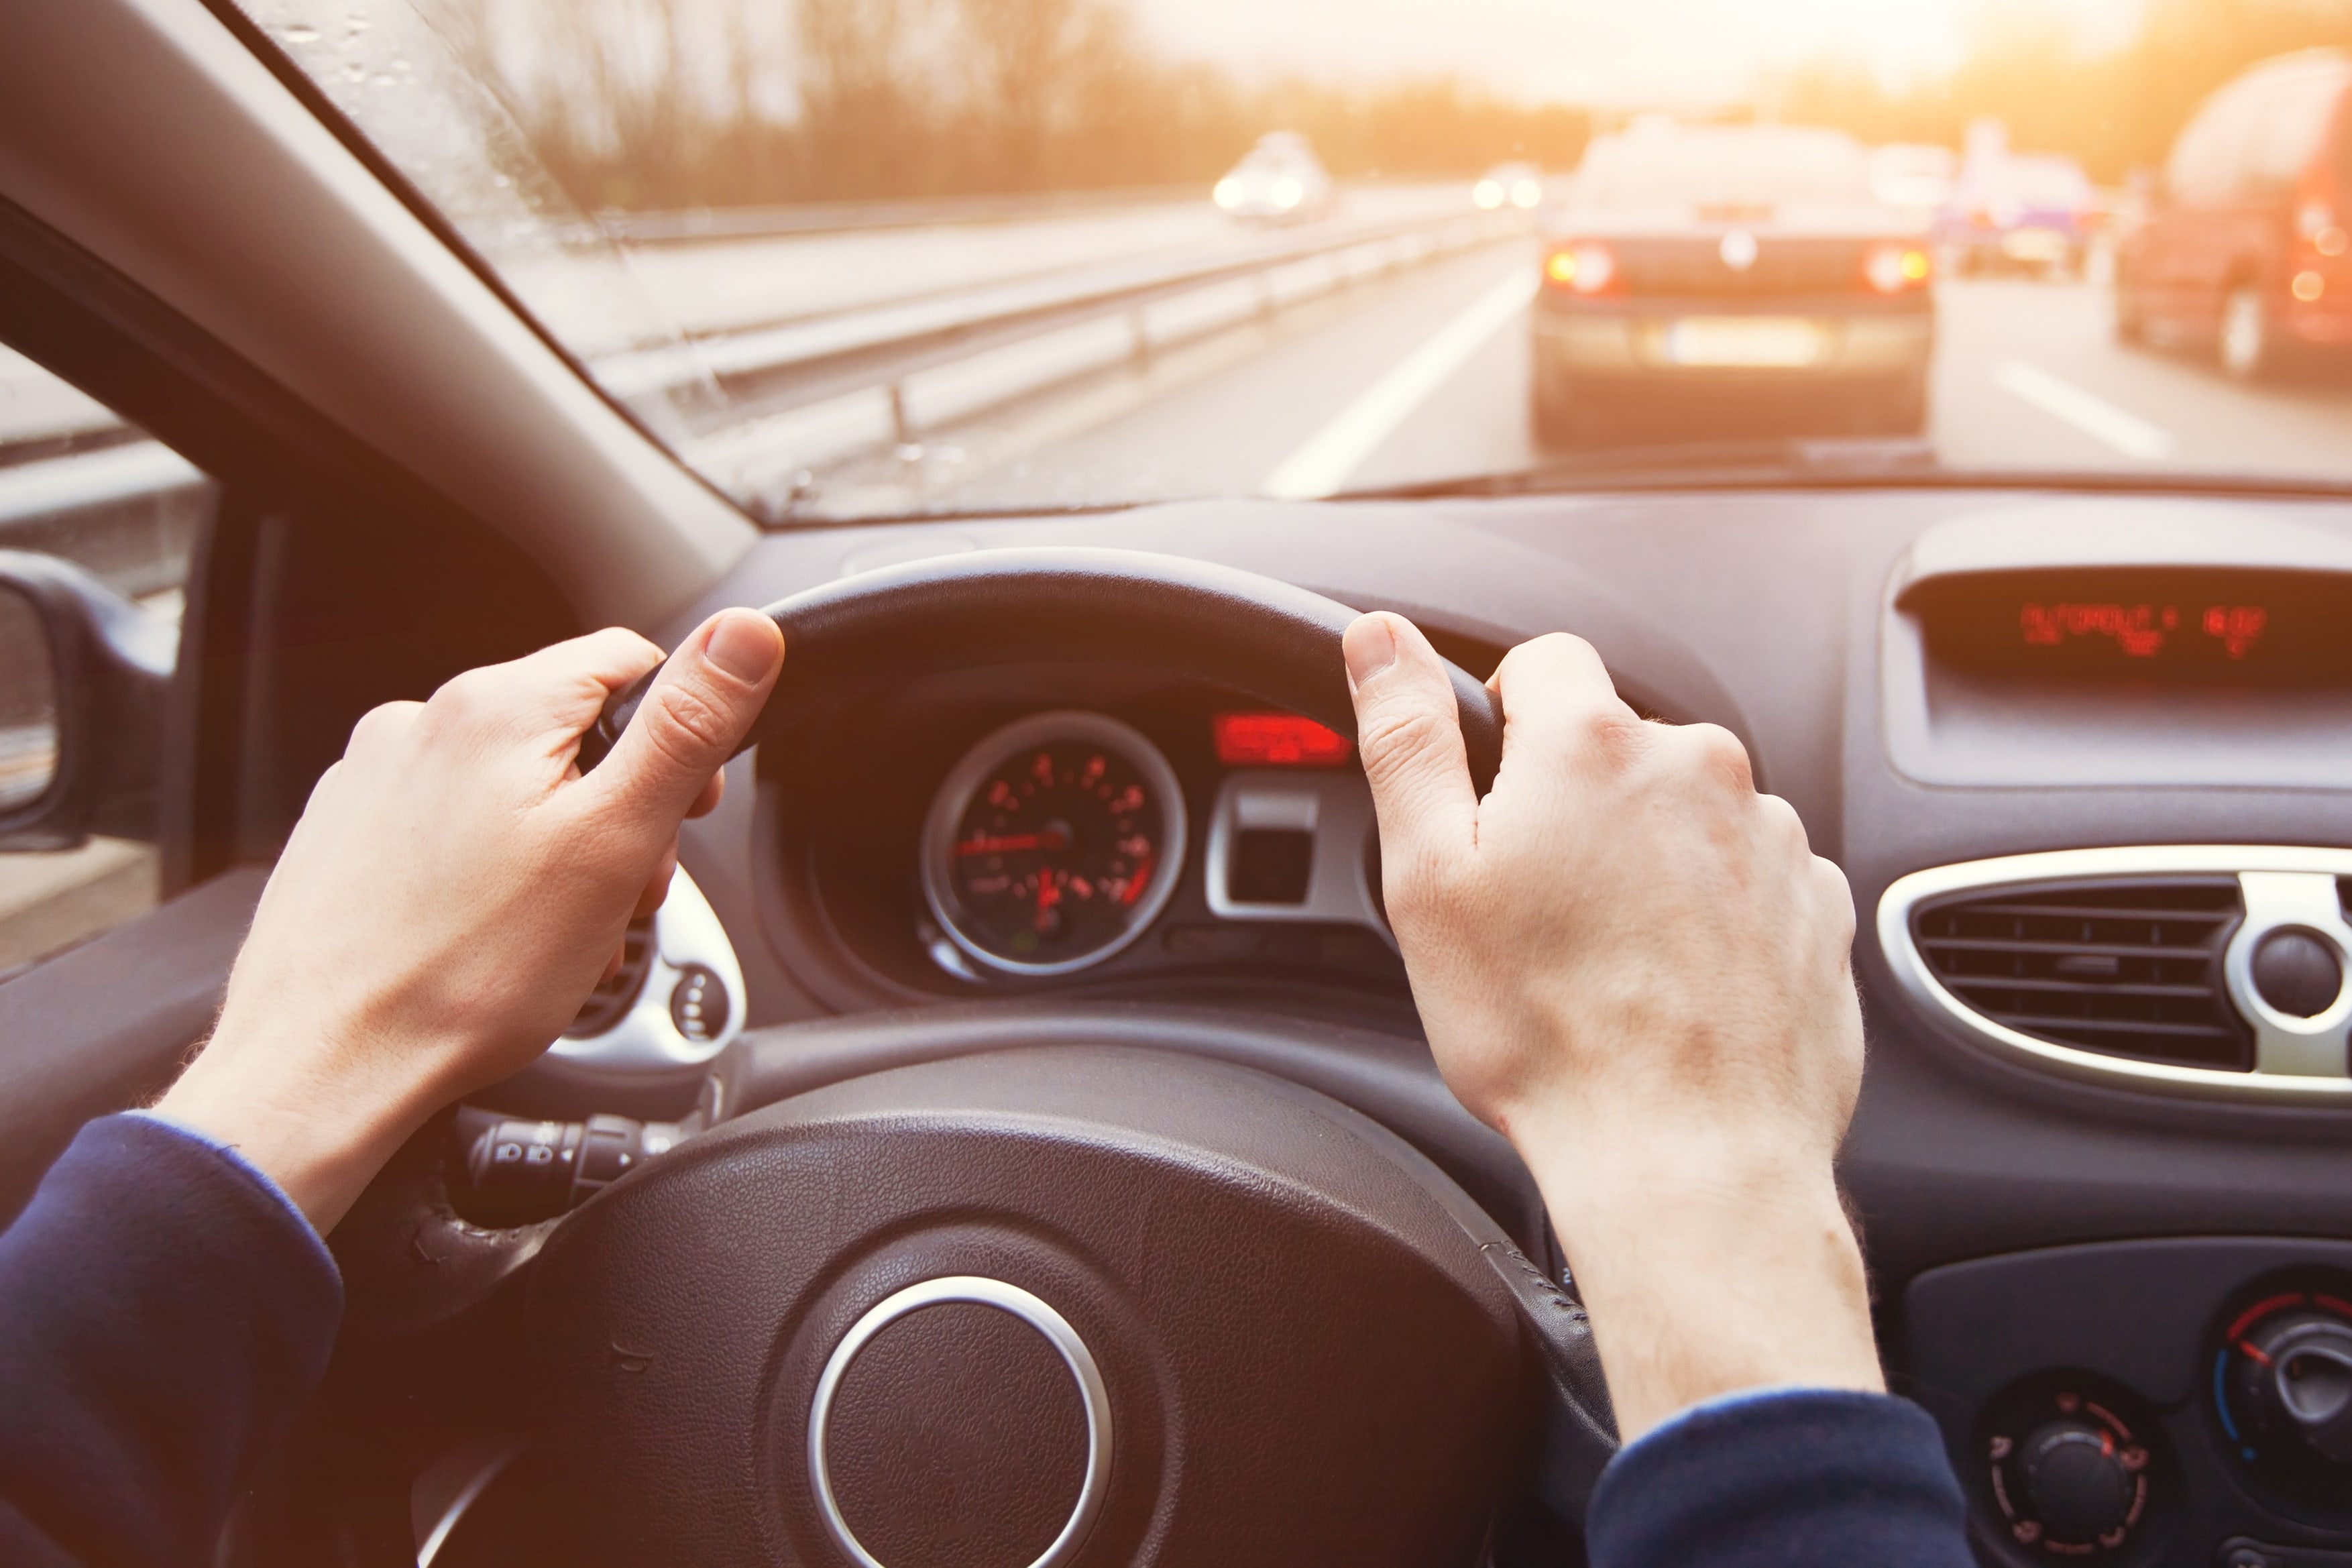 Do you know the risks of using cannabis and getting behind the wheel?